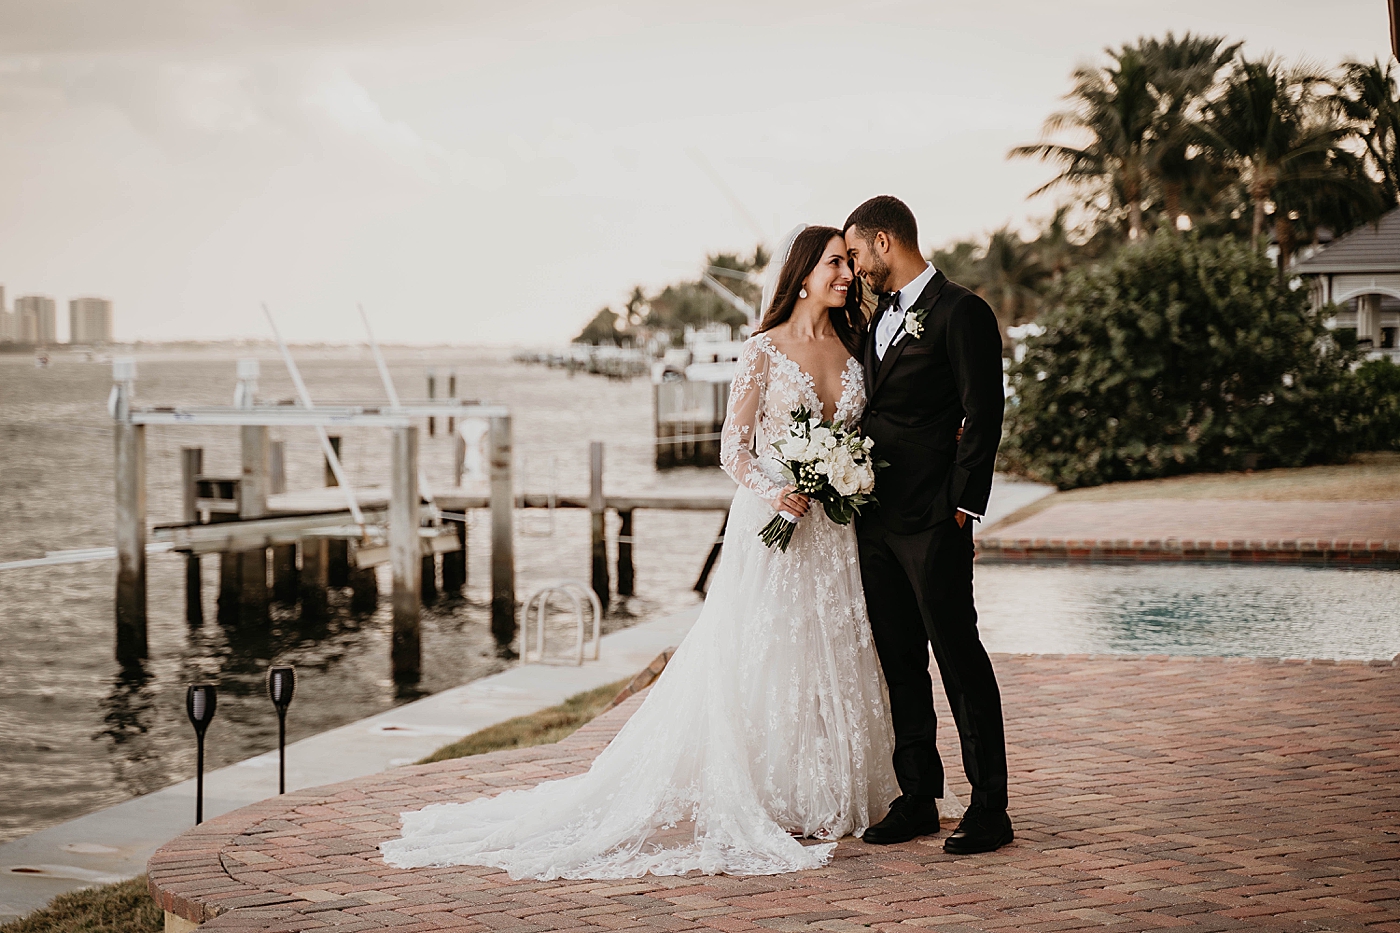 Bride and Groom portrait by the oceanside Intimate Home Wedding captured by South Florida Wedding Photographer Krystal Capone Photography